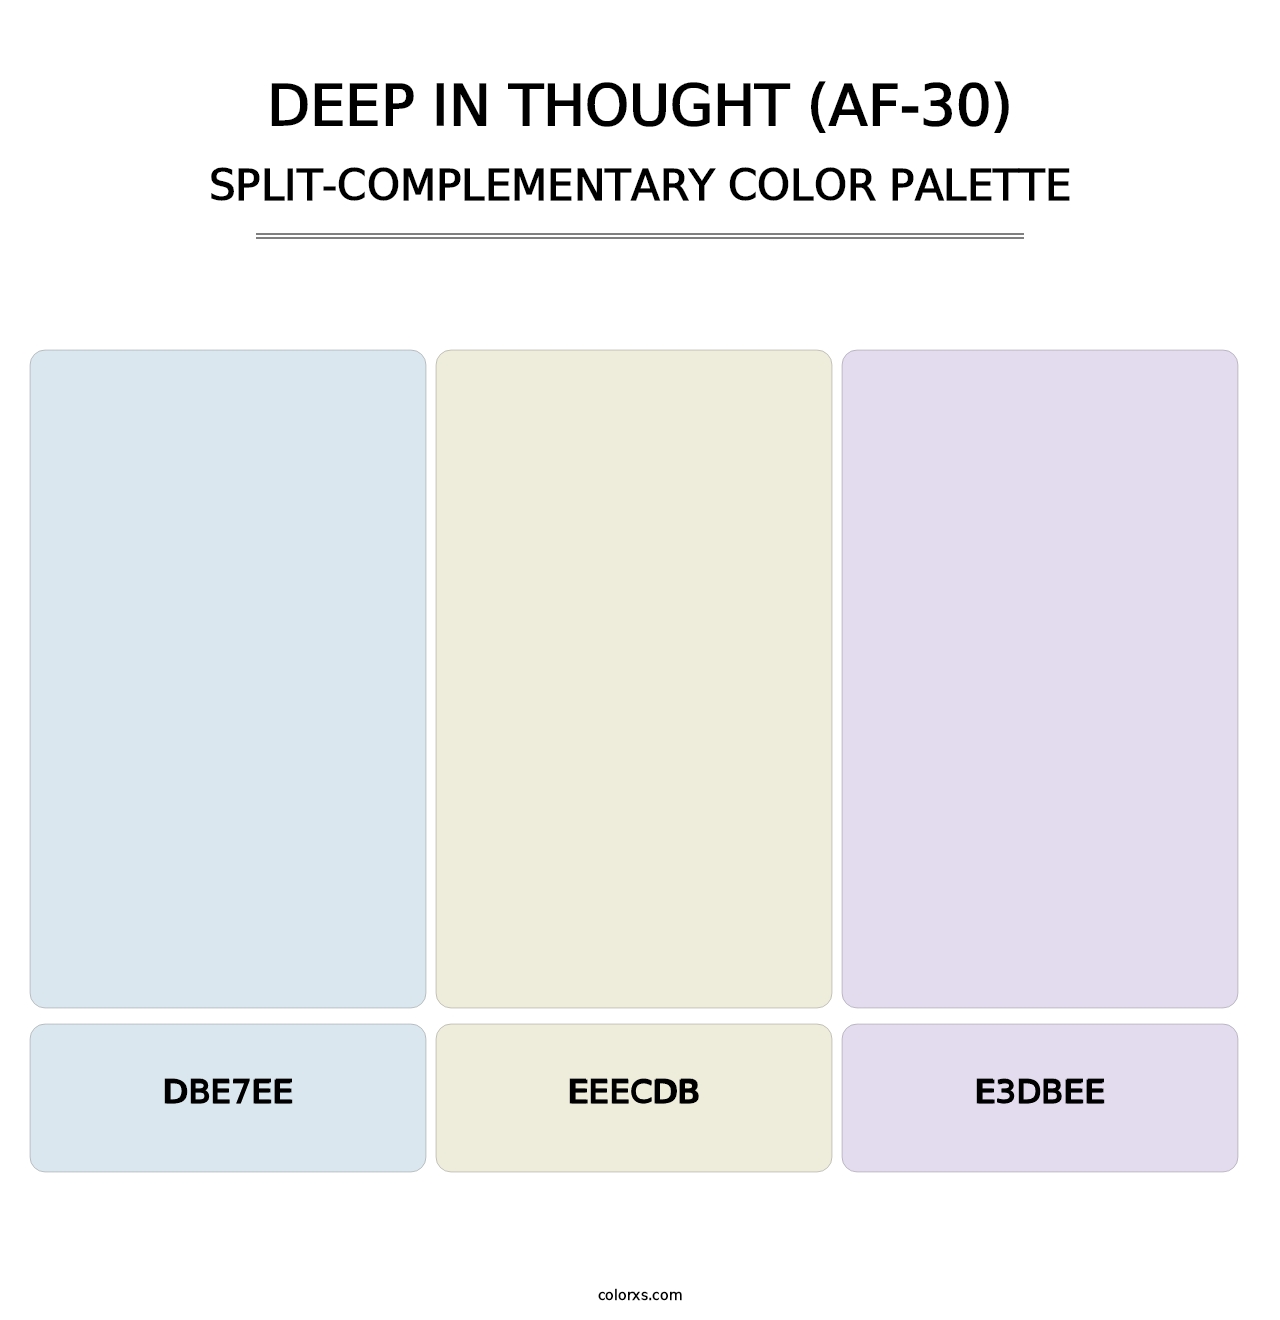 Deep in Thought (AF-30) - Split-Complementary Color Palette